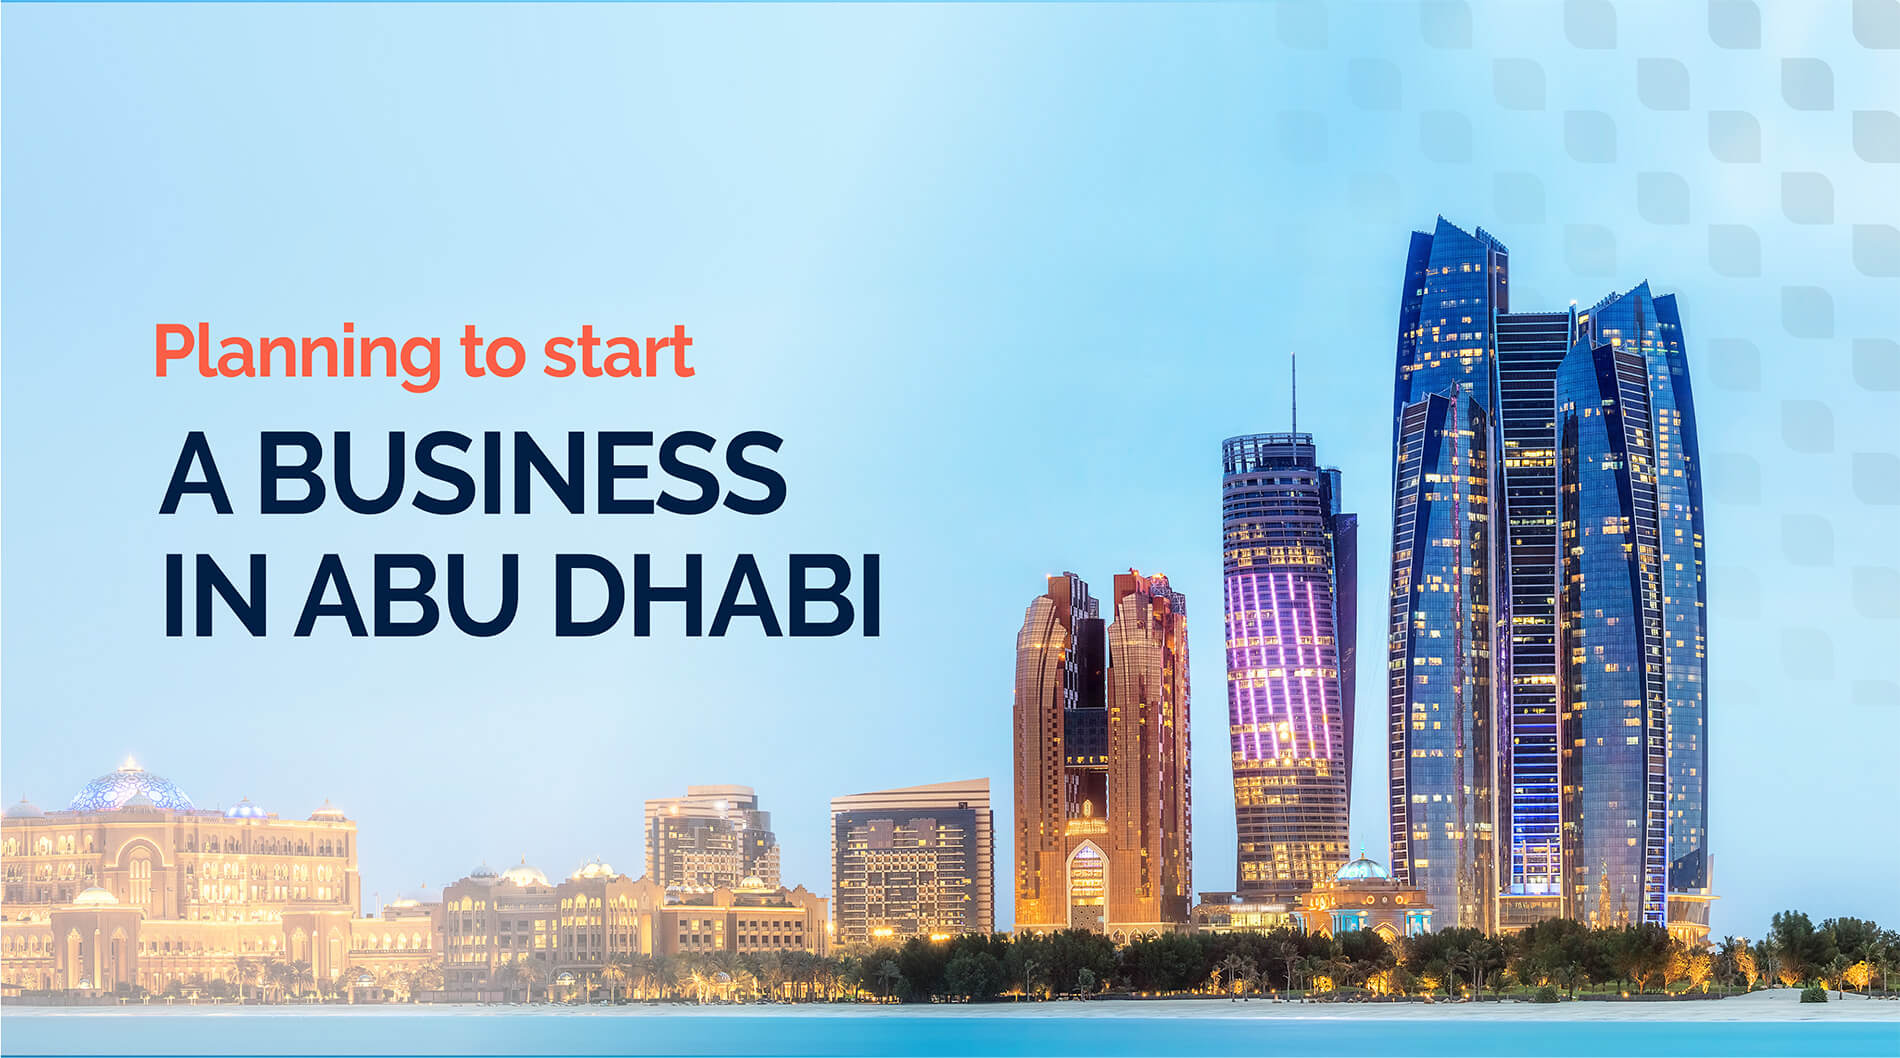 How much does it cost to set up a business in Abu Dhabi?